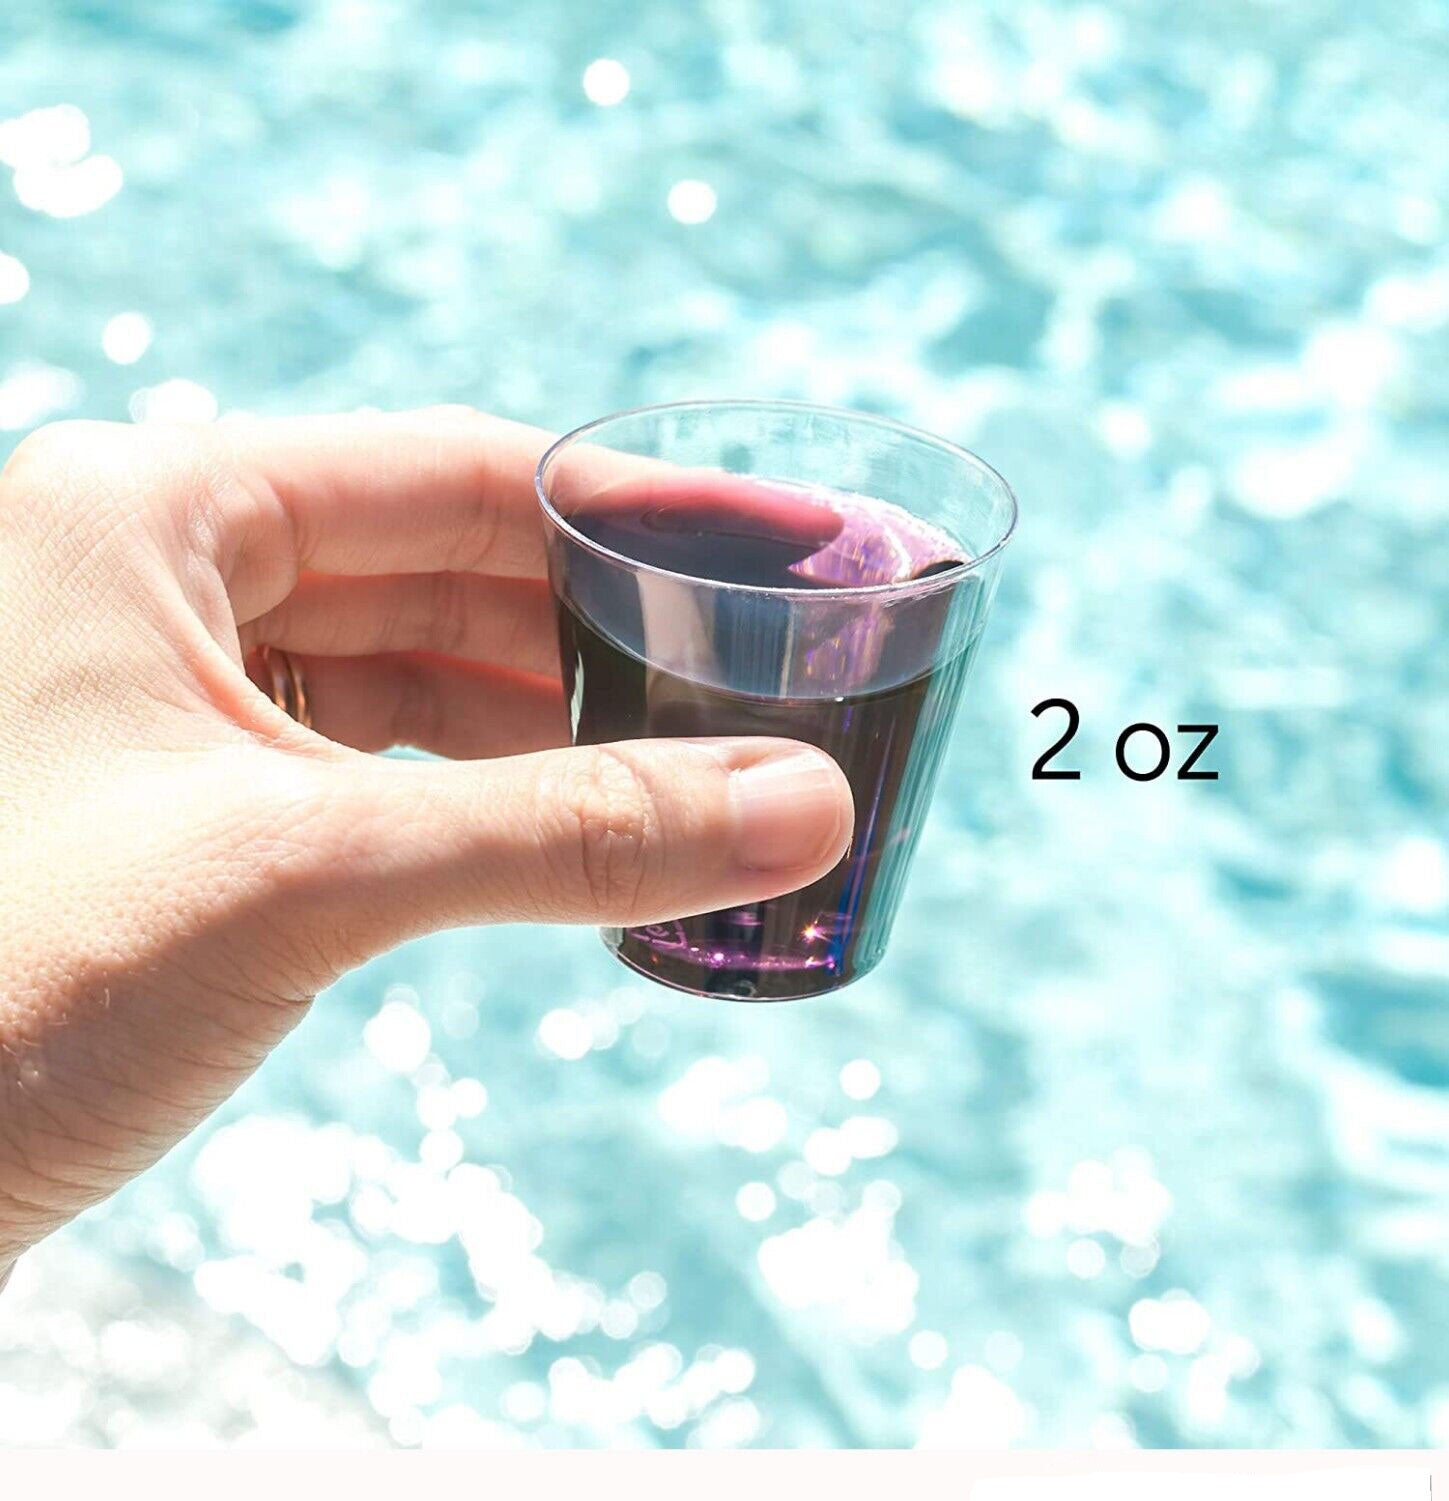 Clear Shot Glasses Plastic Disposable Cups